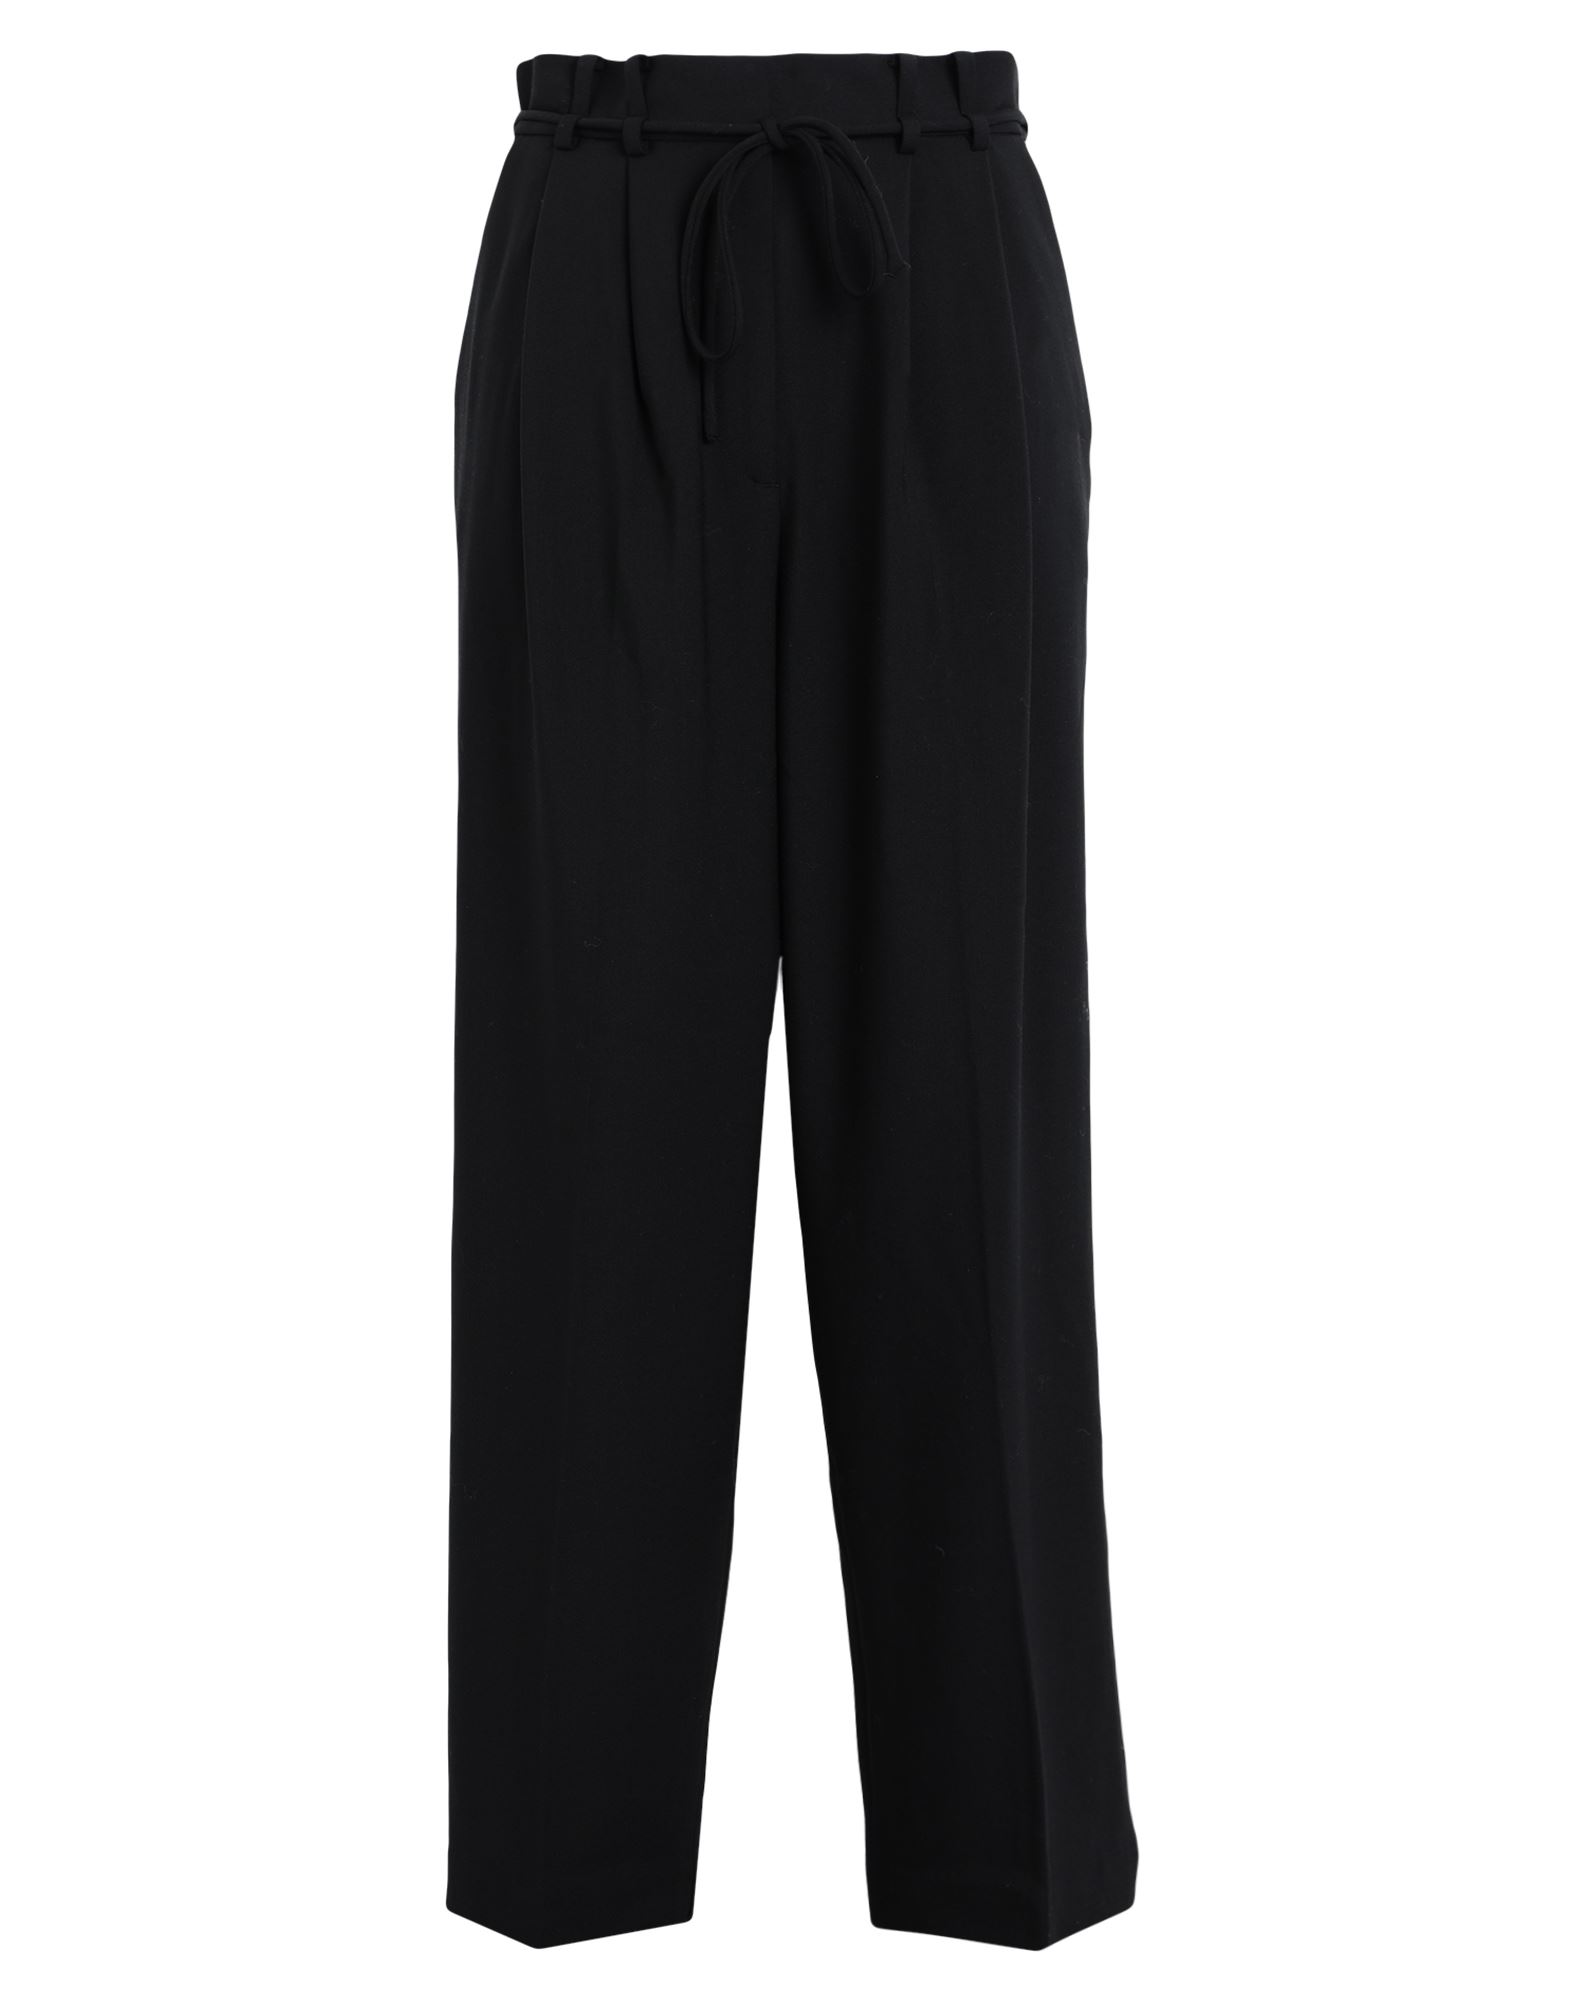  OTHER STORIES Trousers for Women